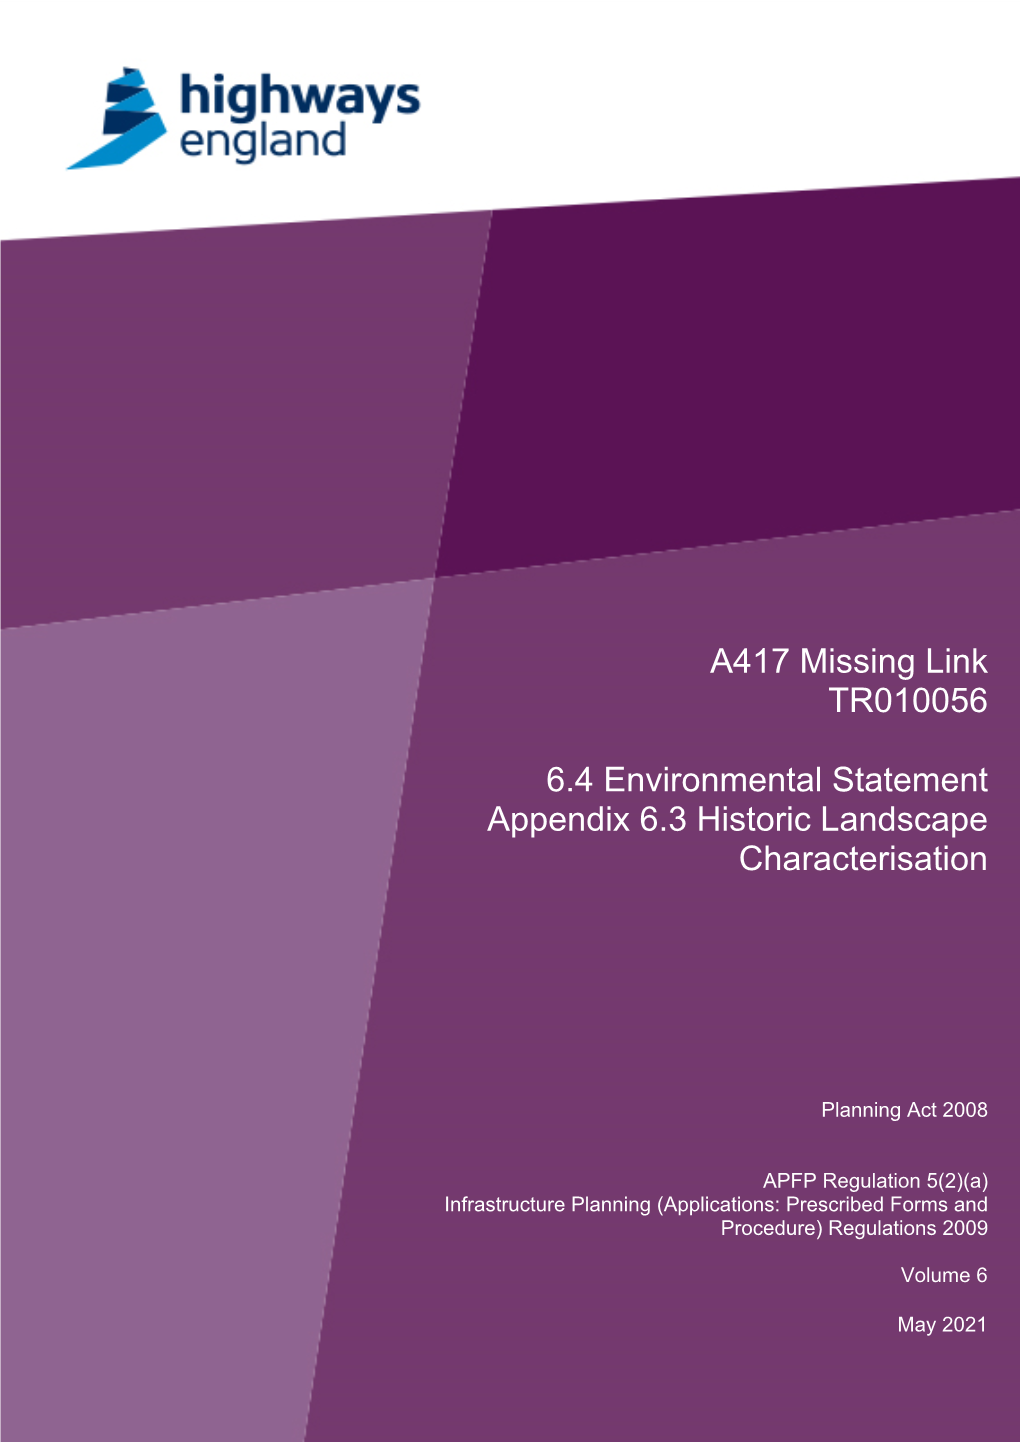 A417 Missing Link TR010056 6.4 Environmental Statement Appendix